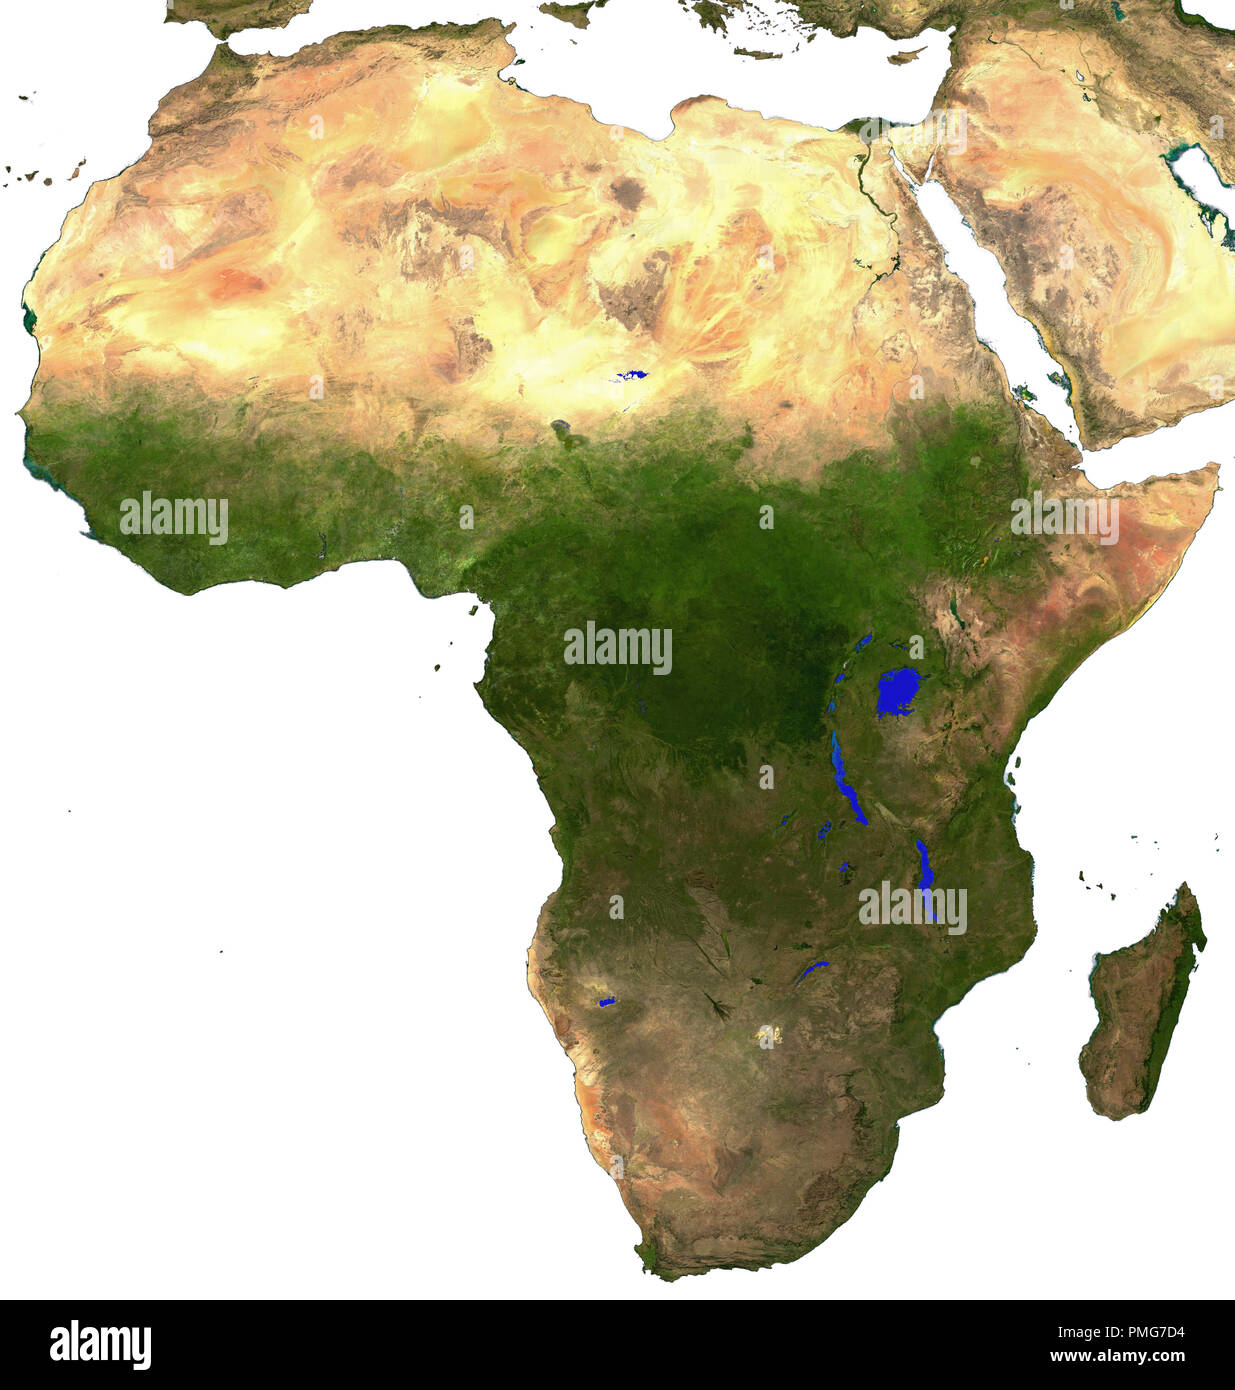 Africa - Composite satellite image of the entire continent isolated on a white background. See additional information below. Stock Photo